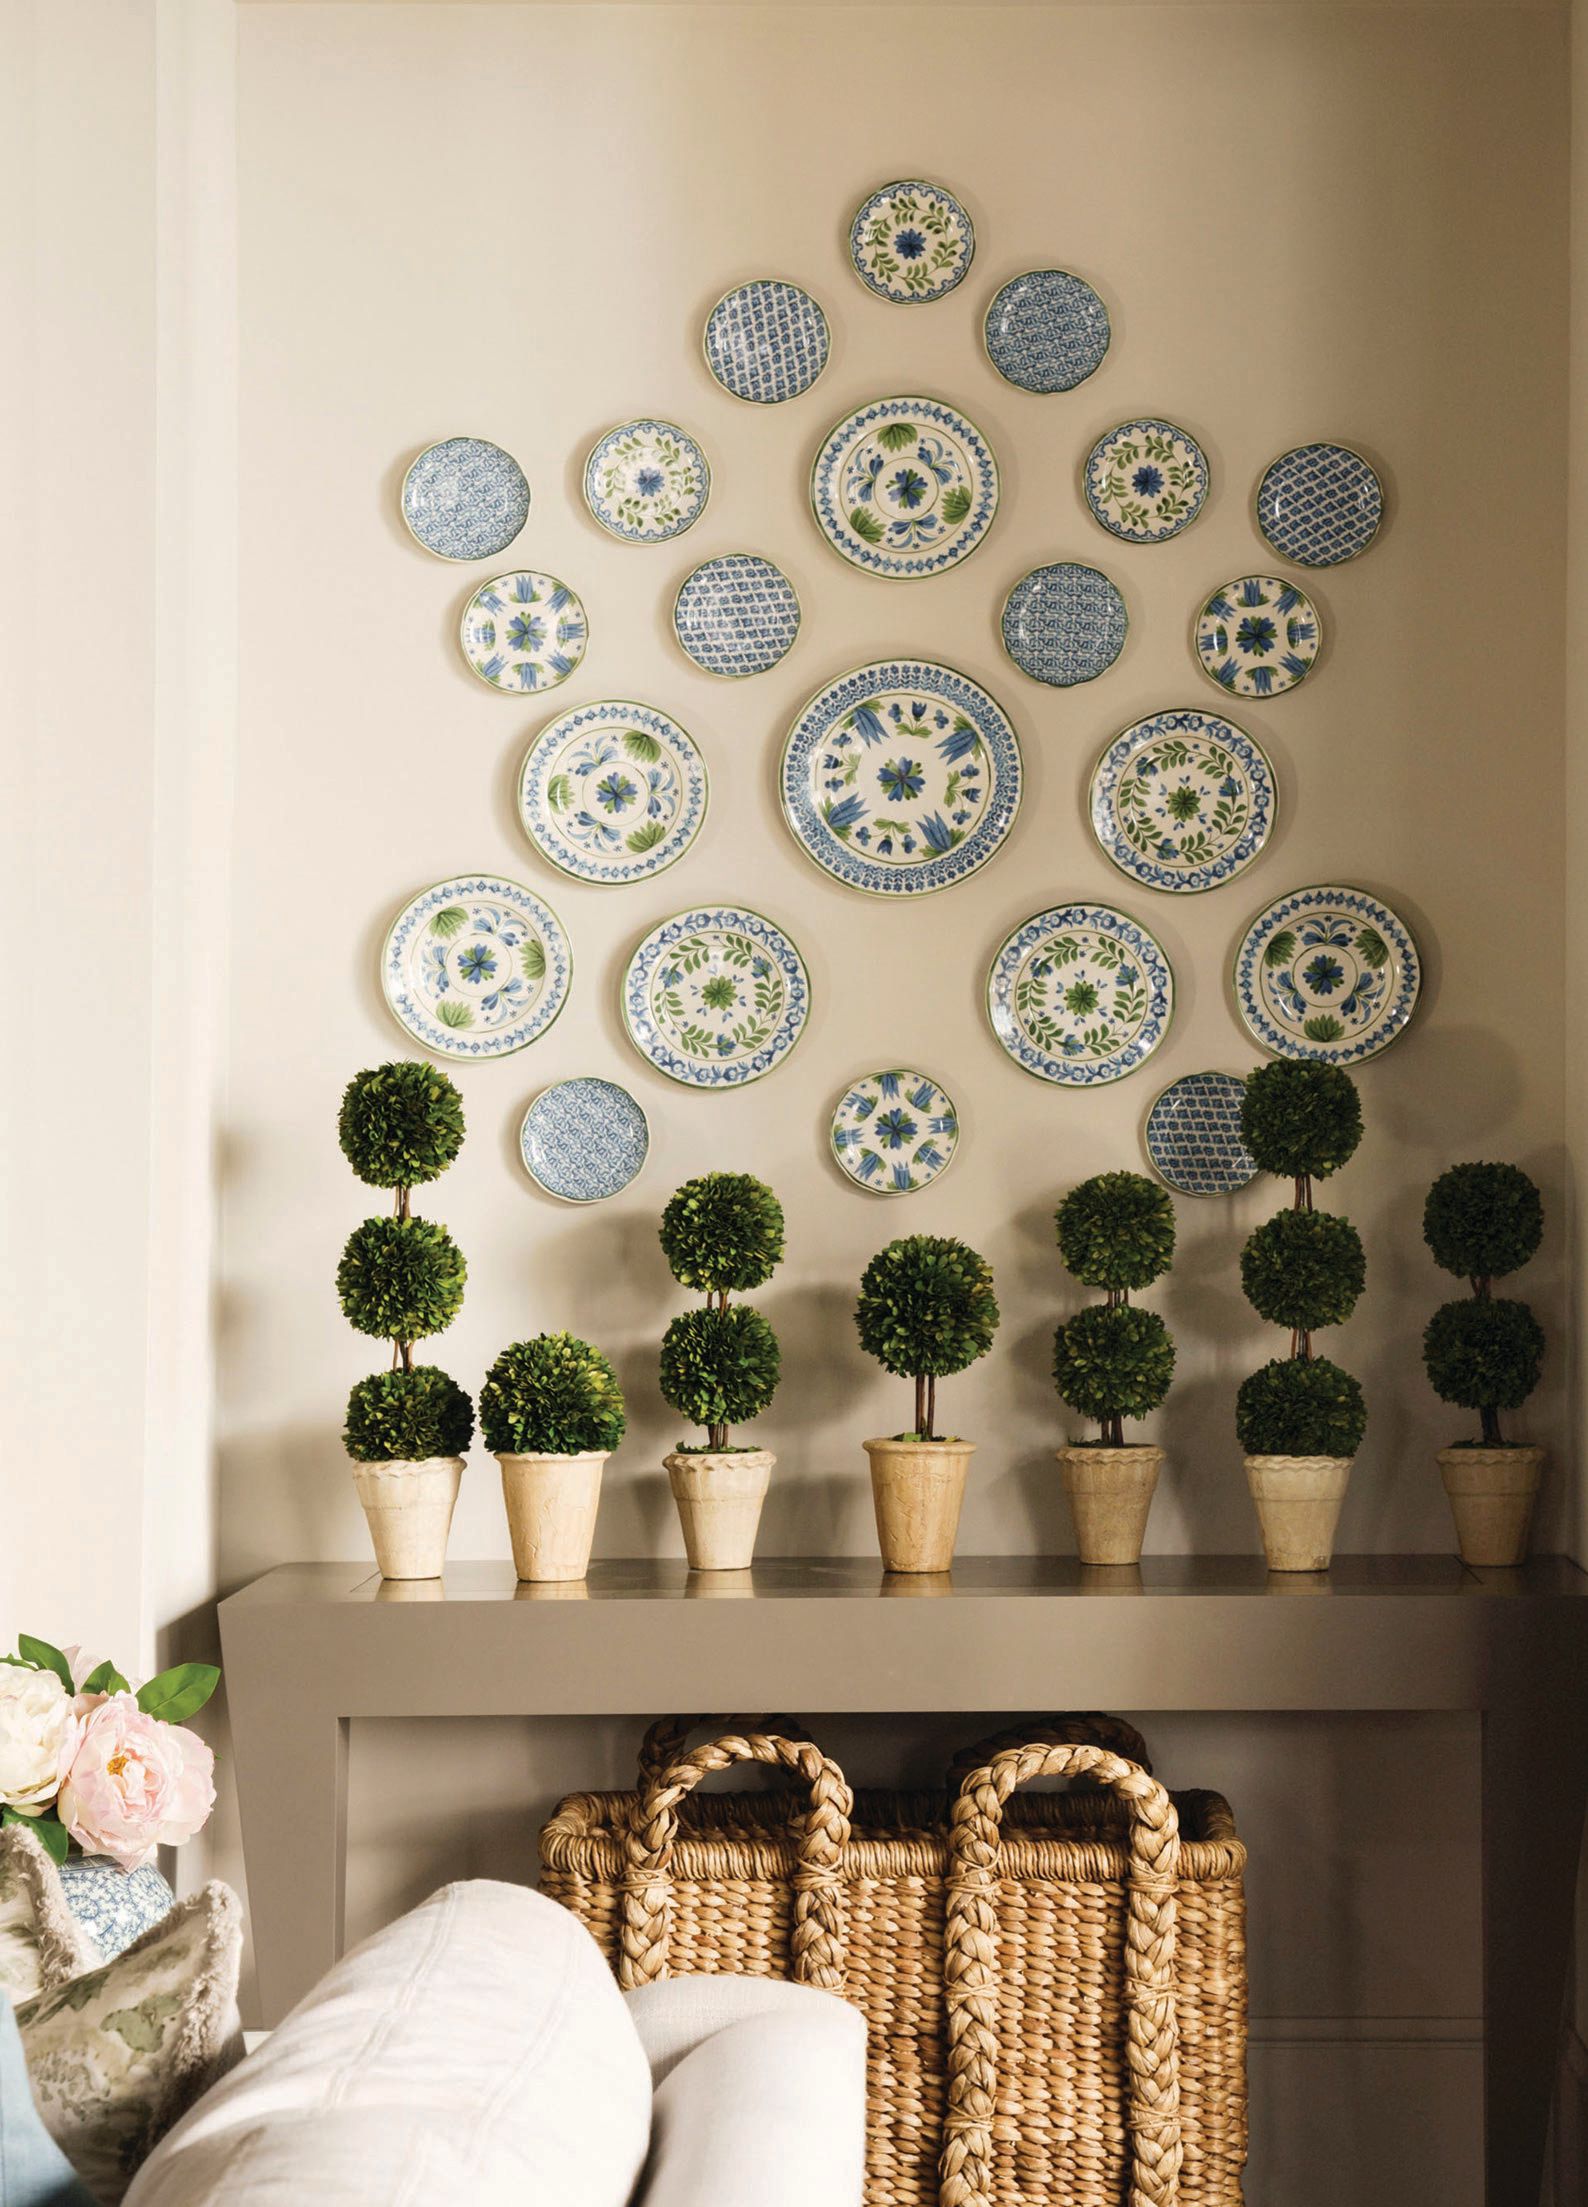 The living room features a collection of china plates hung as a gallery wall. PHOTOGRAPHED BY JACK THOMPSON